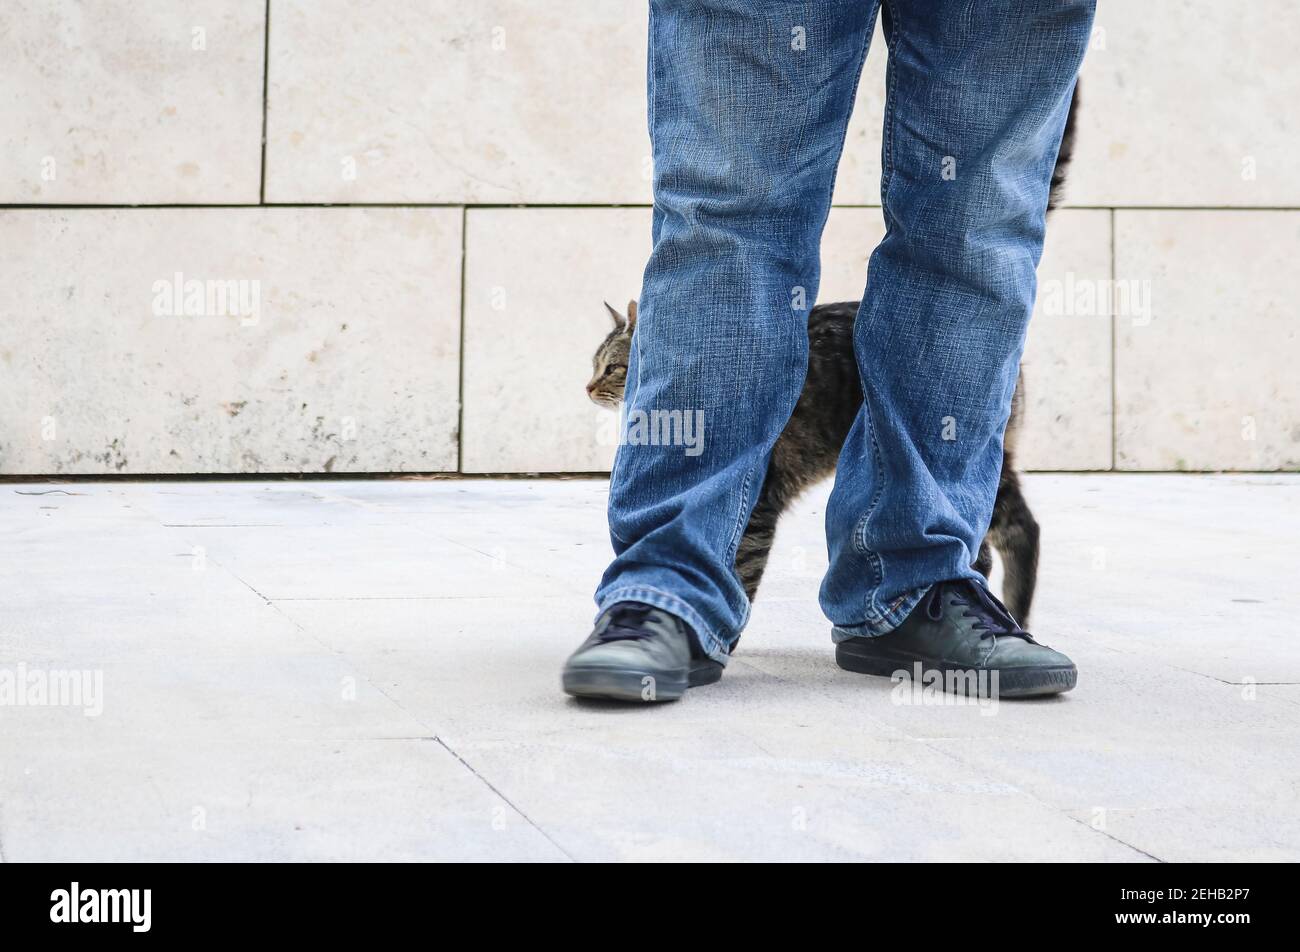 Man or boy standing on outdoors white tile with marble block wall behind in blue jeans with cat rubbing up against his legs - cropped and selective fo Stock Photo